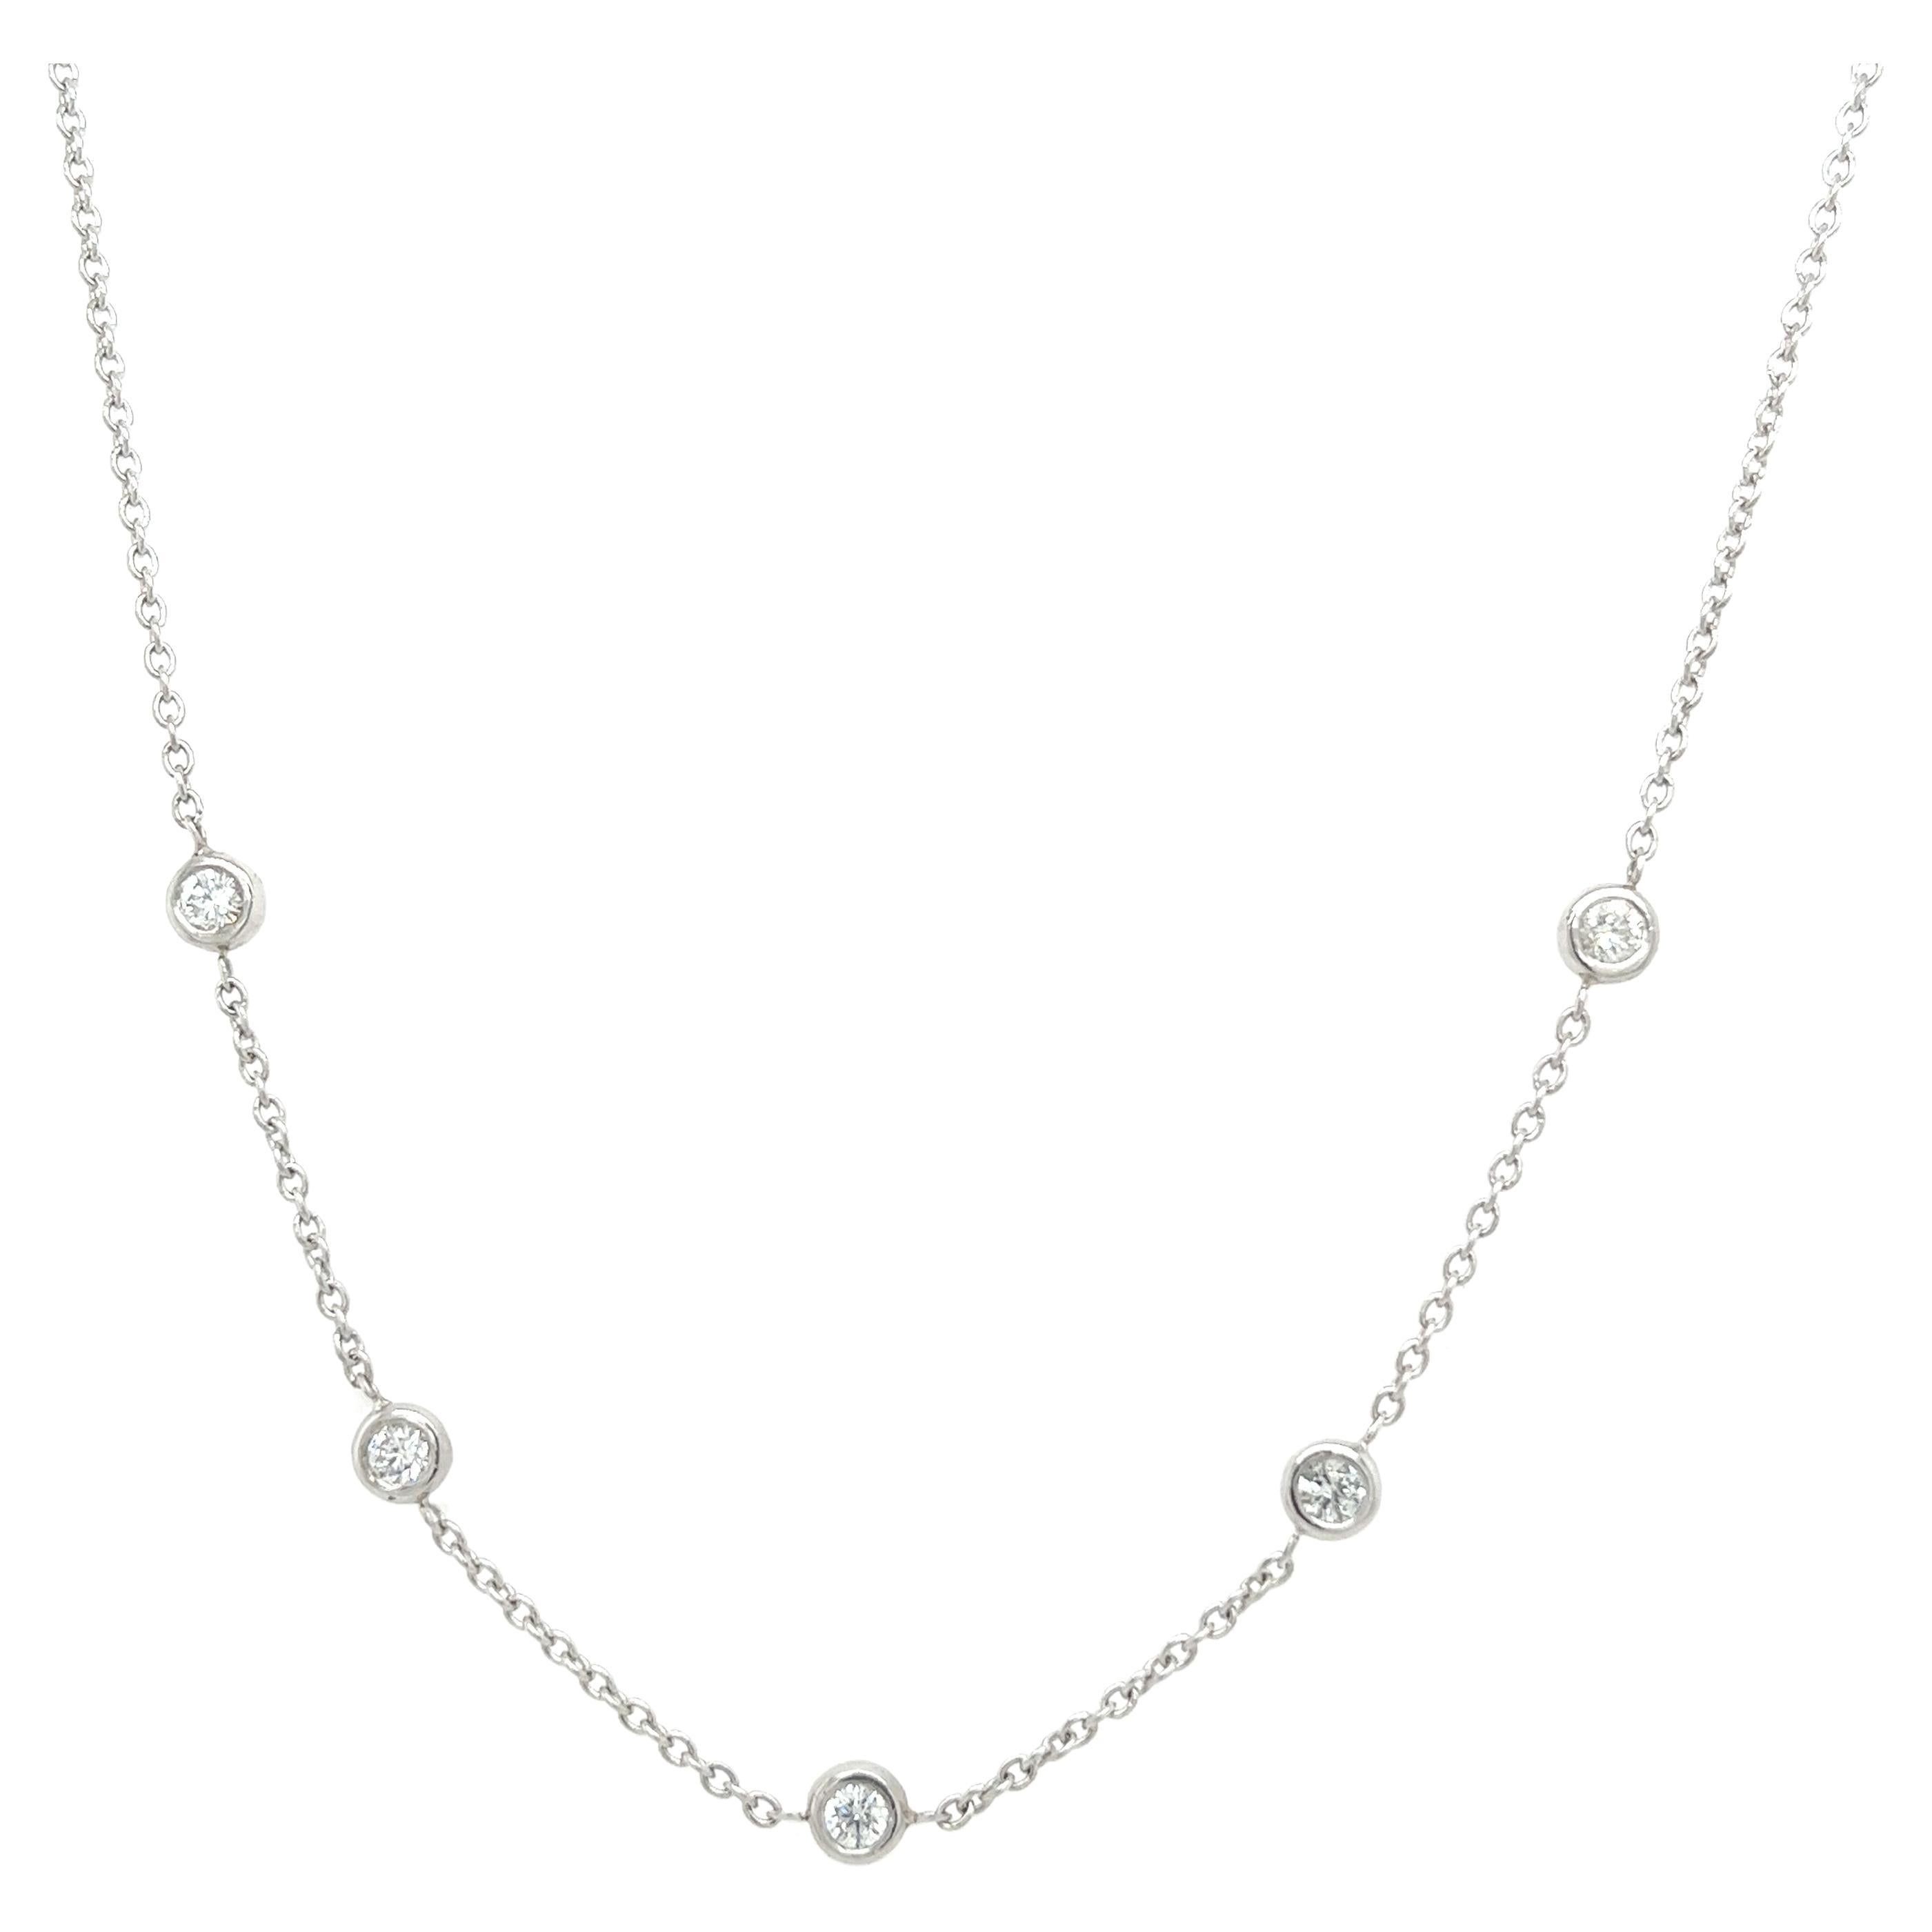 New 5-Stone Diamond Set Necklace with 0.40ct of Diamonds in 14ct White Gold For Sale